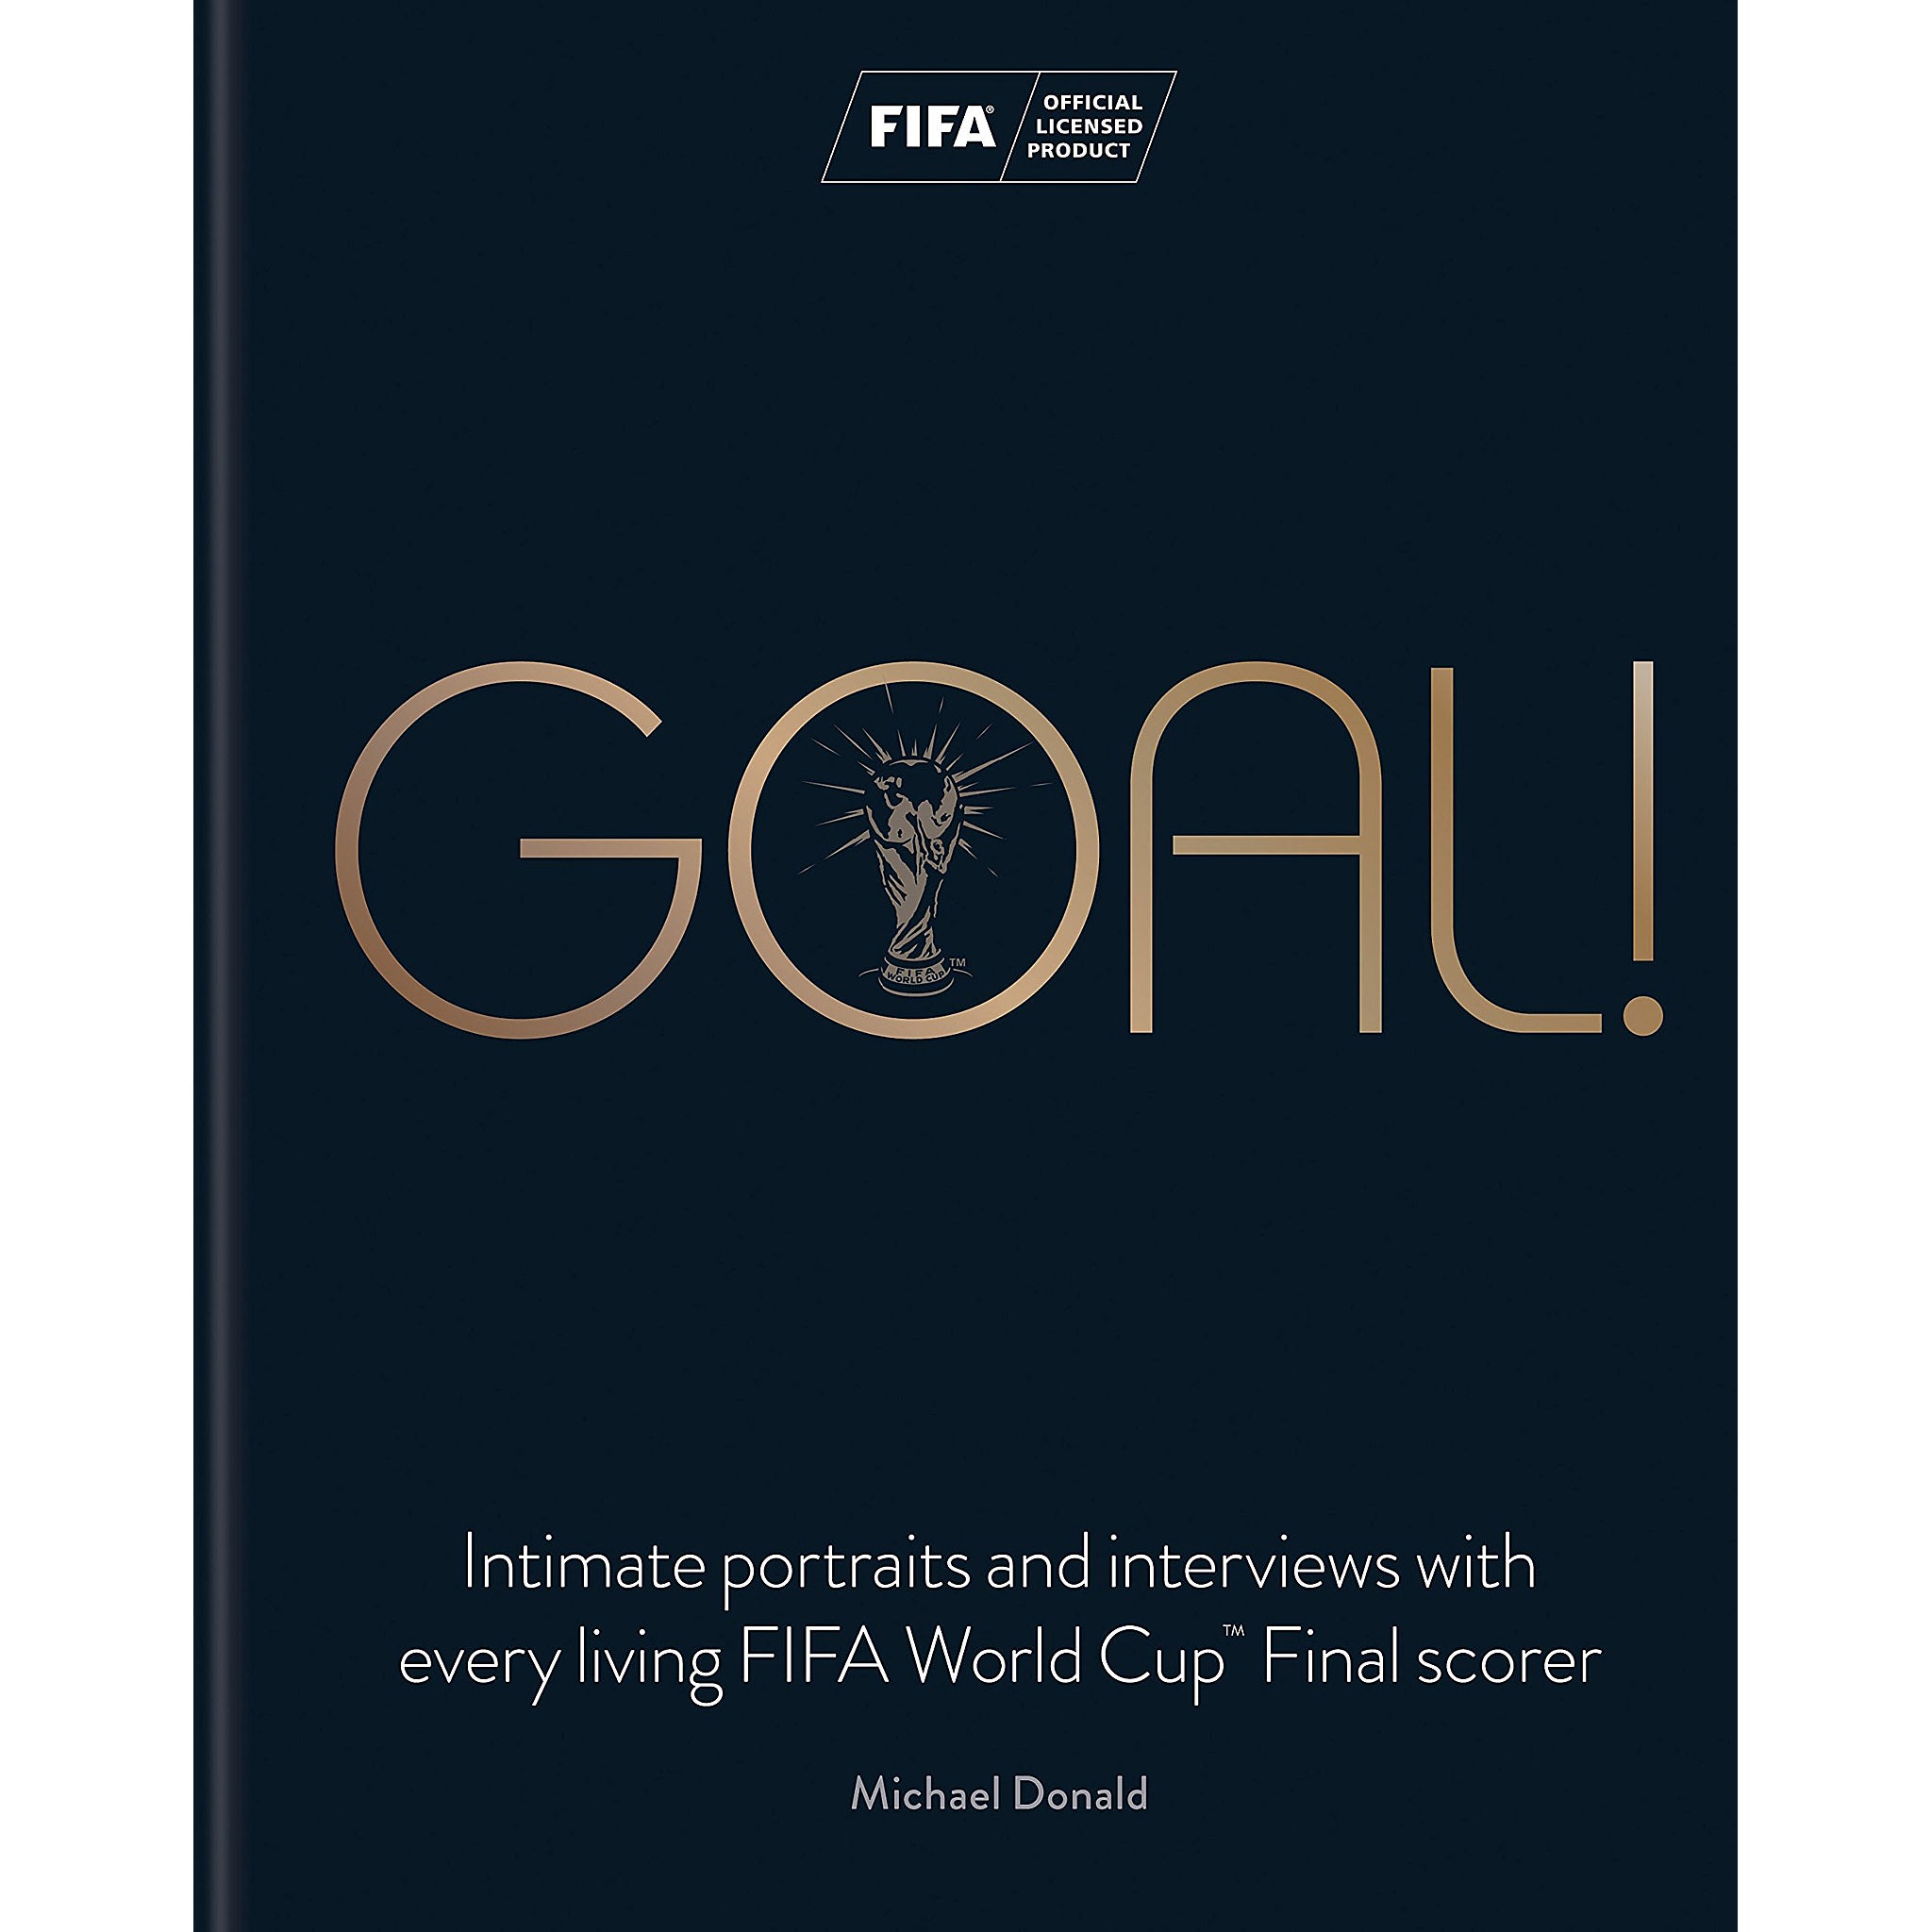 Goal! Intimate portraits and interviews with every living FIFA World Cup Final scorer